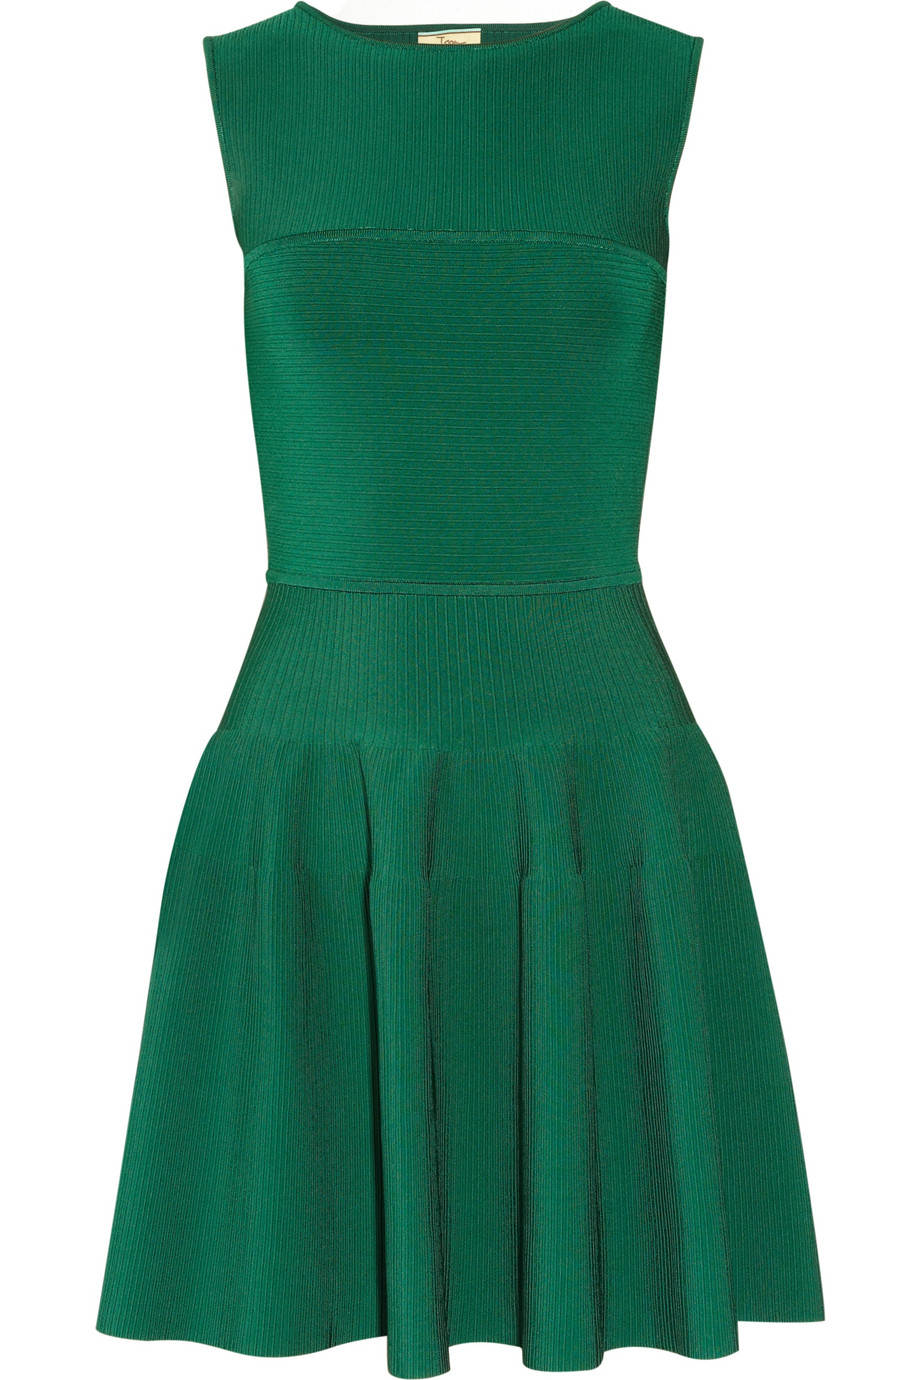 Issa Cutout Ribbed Knitted Dress in Green | Lyst